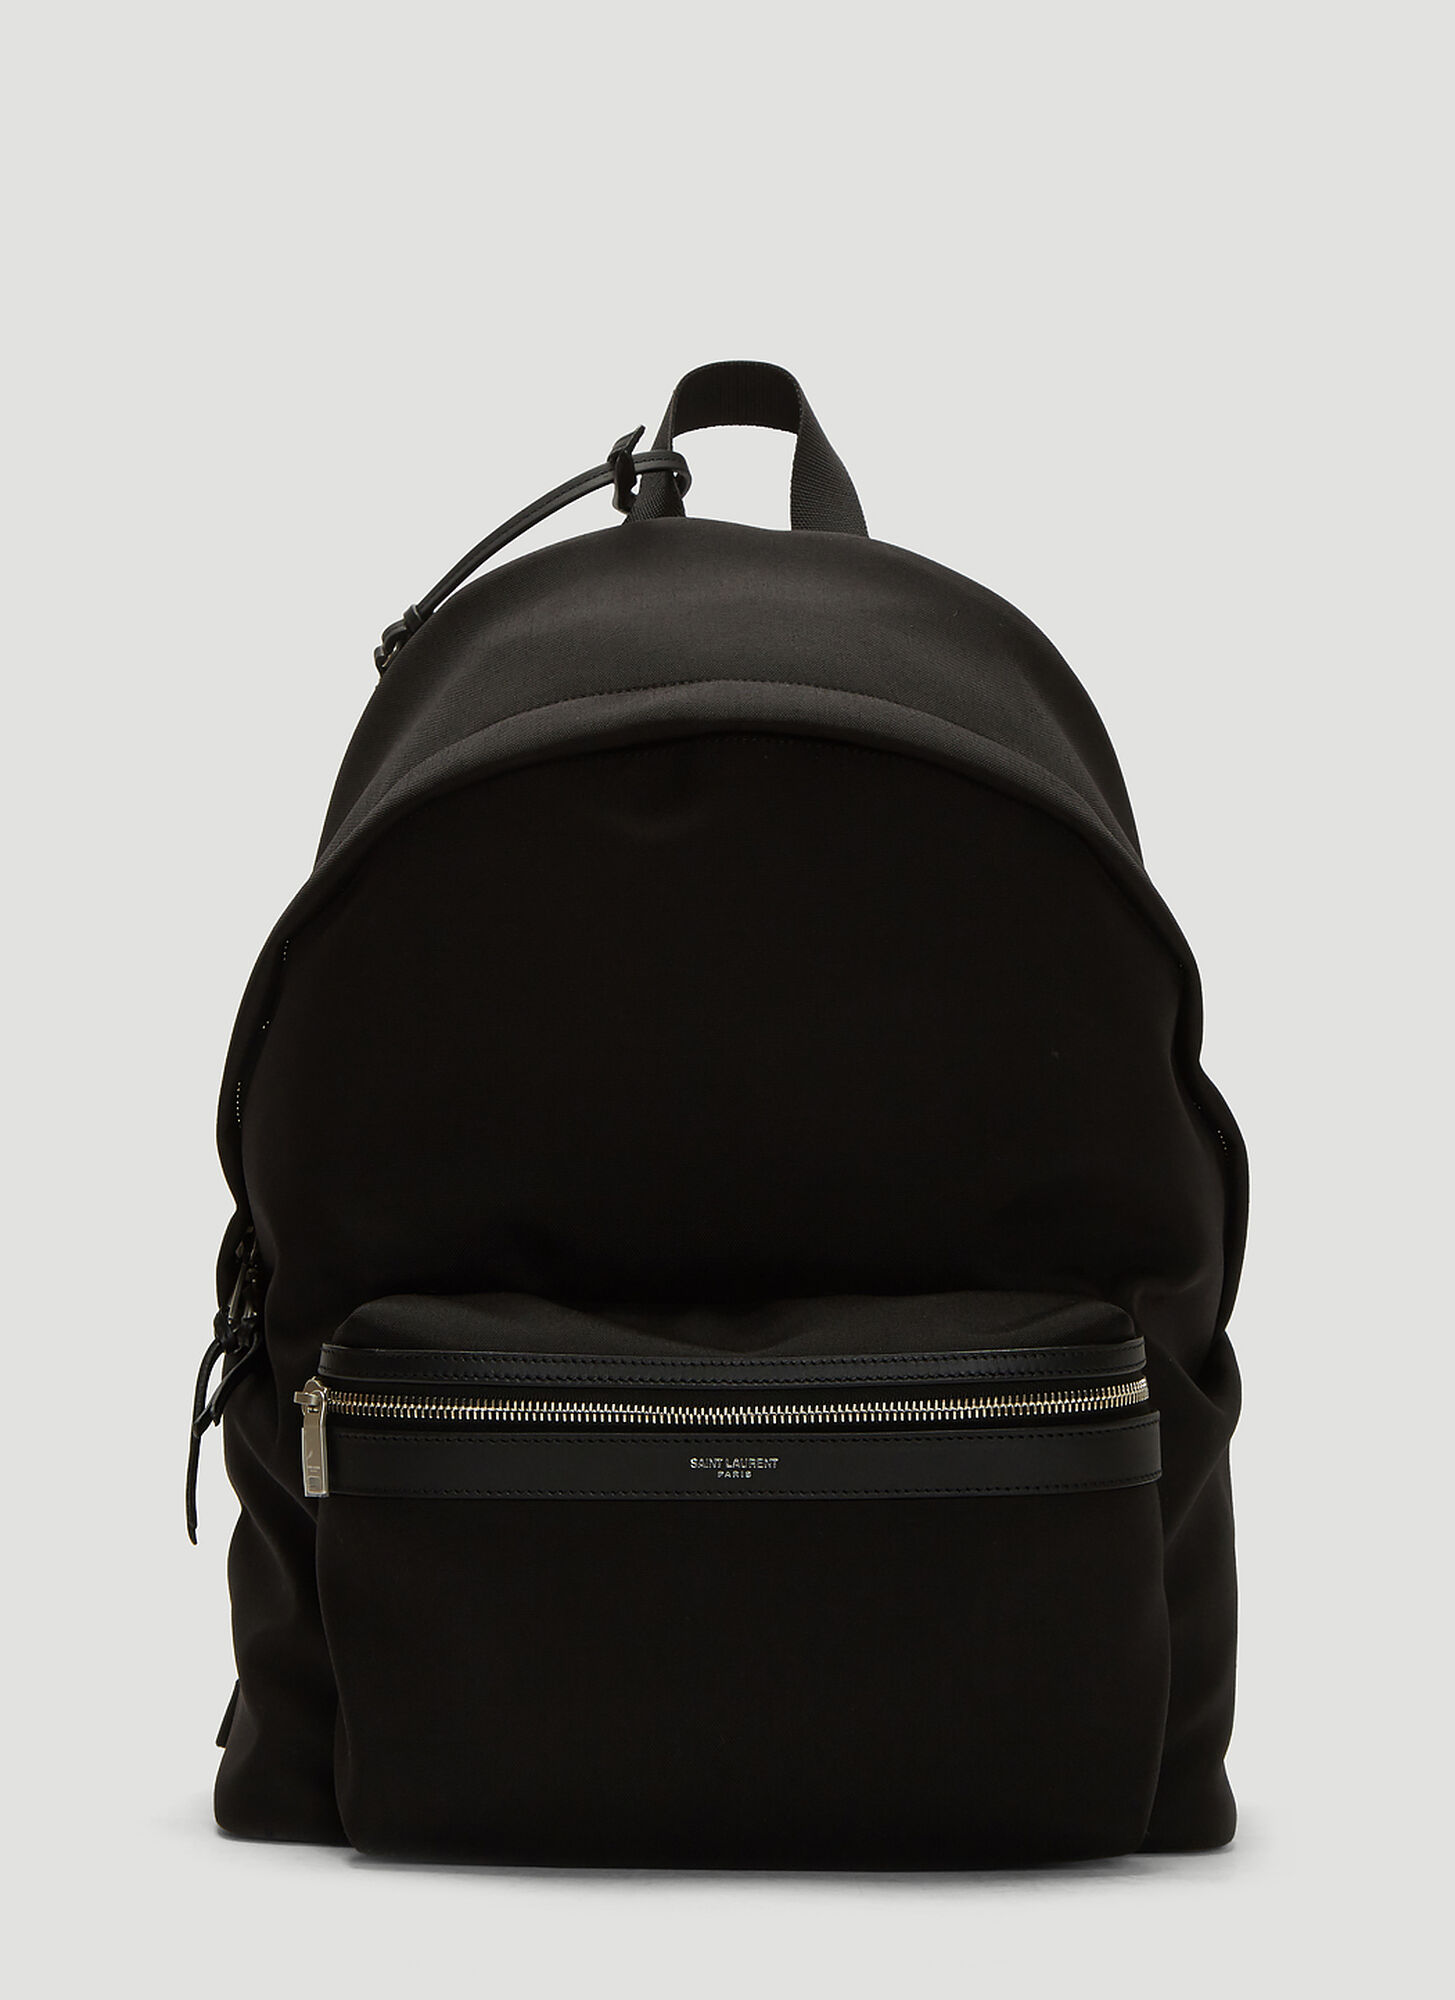 Saint Laurent City Canvas Backpack in Black size One Size | The Fashionisto